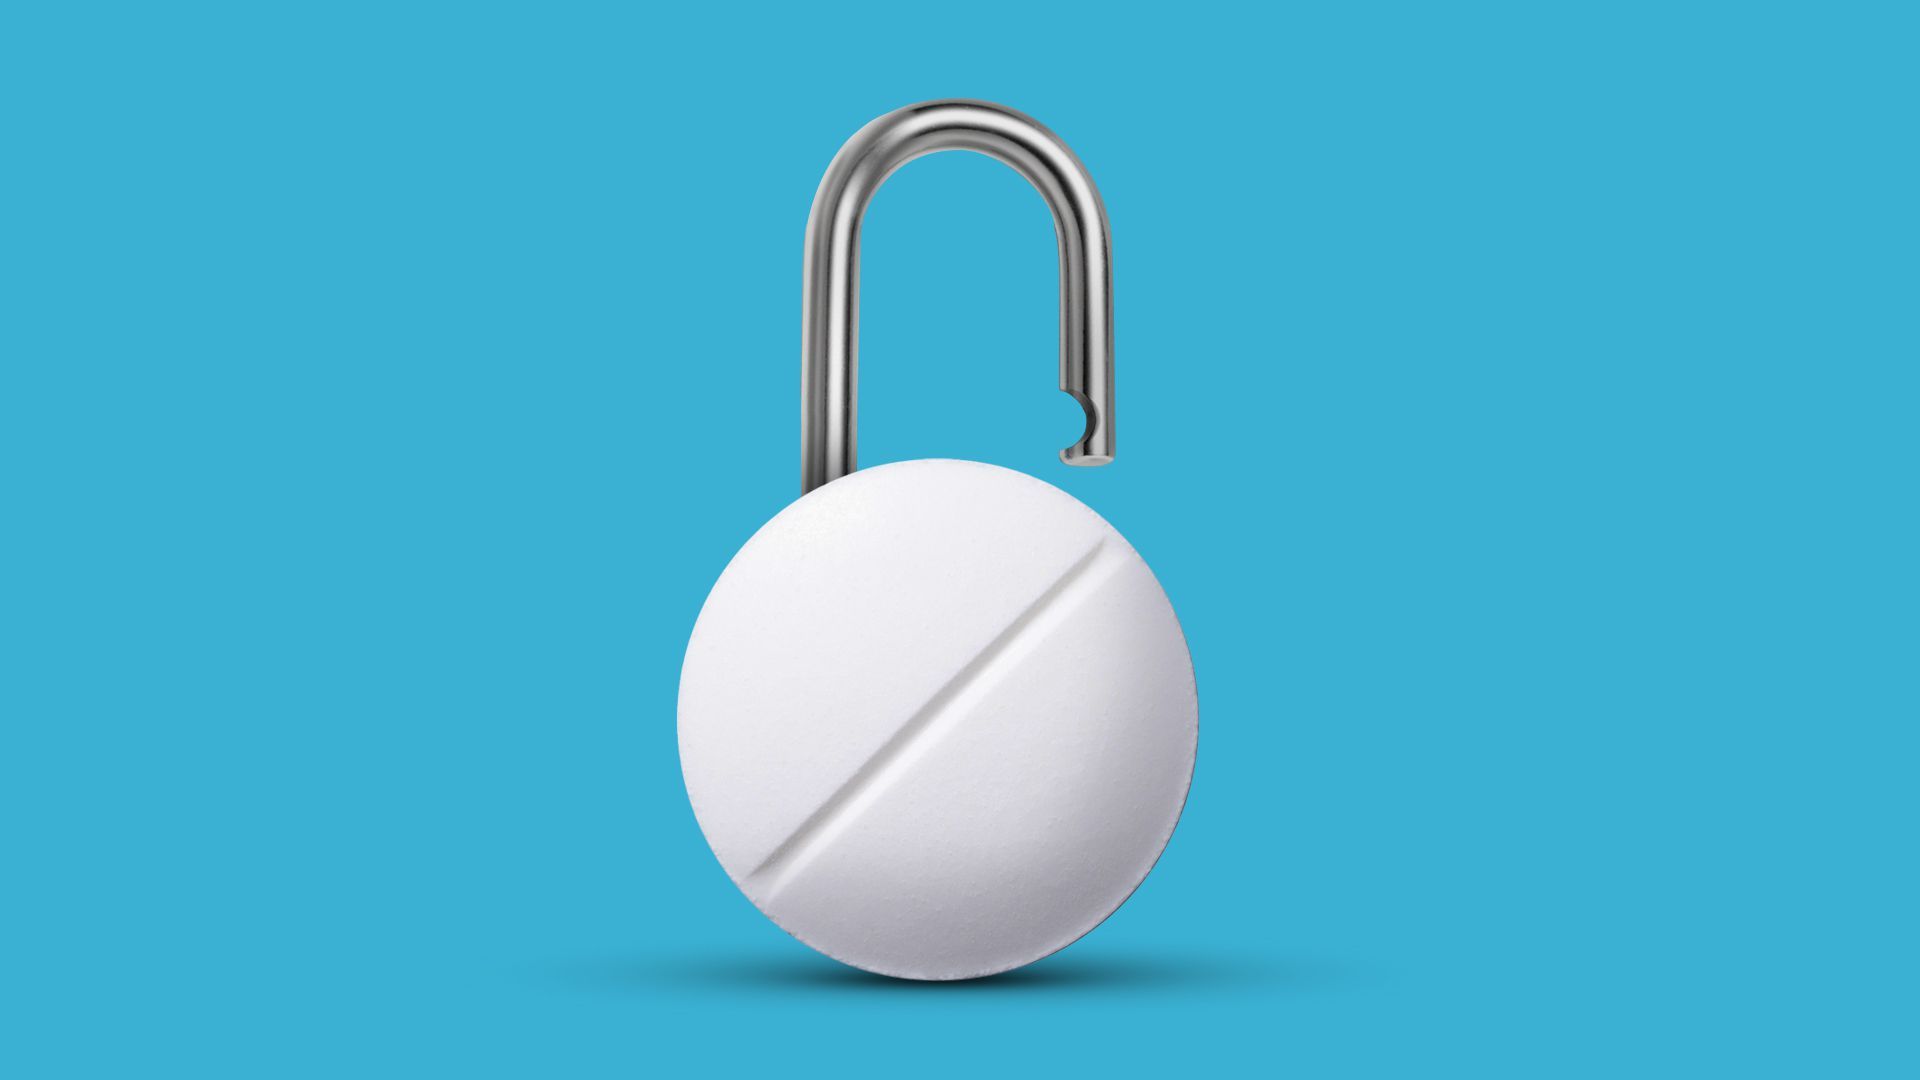 Illustration of a pill with an unlocked padlock top